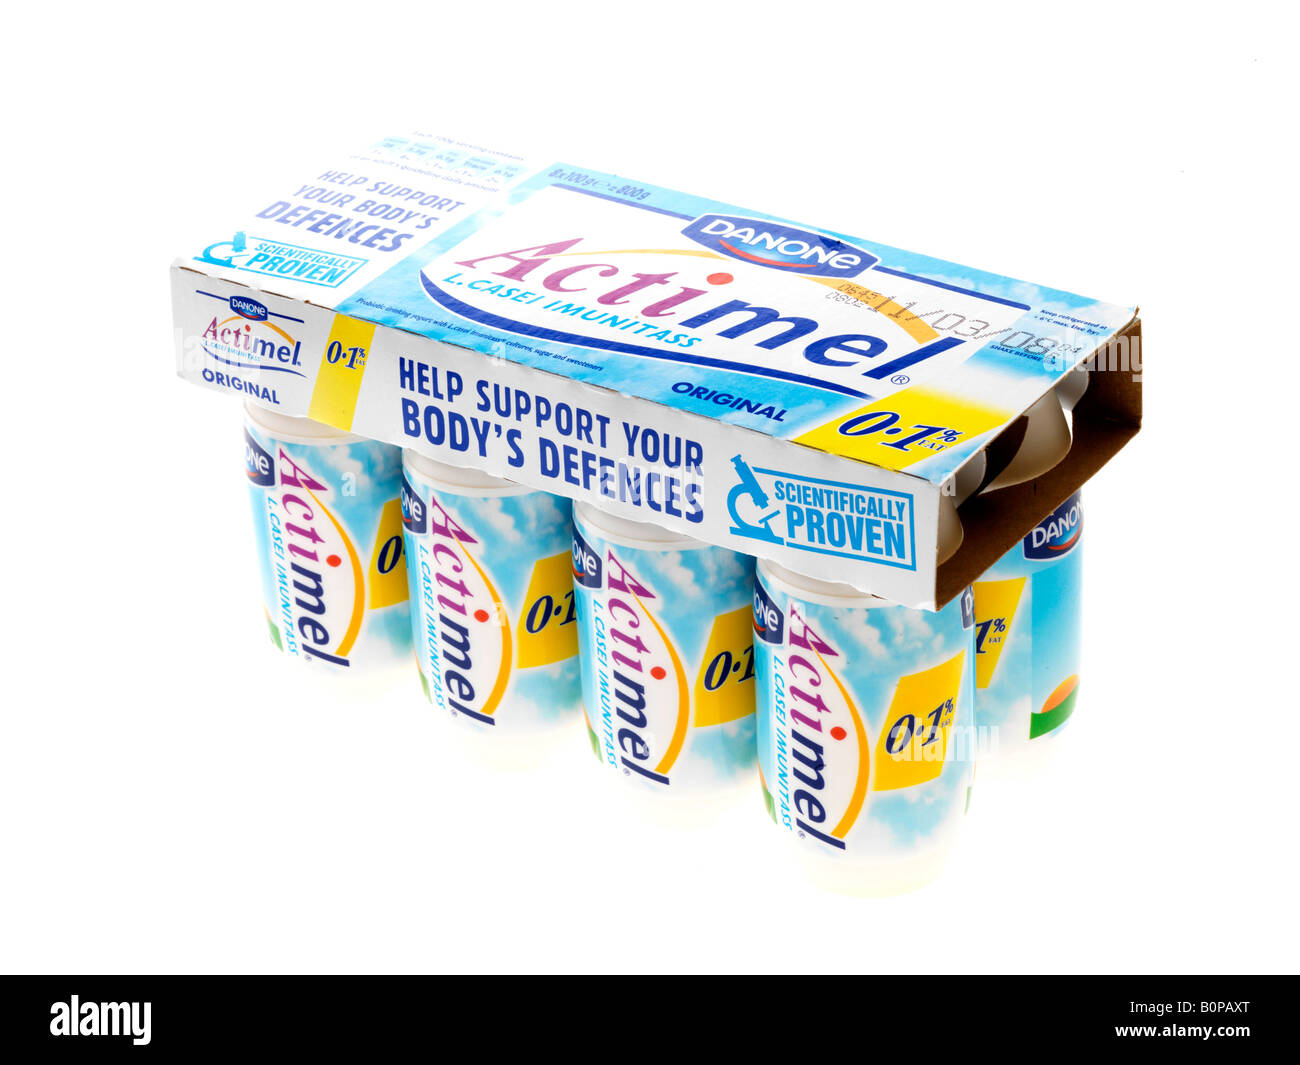 Alamy stock and Actimel photography hi-res images -